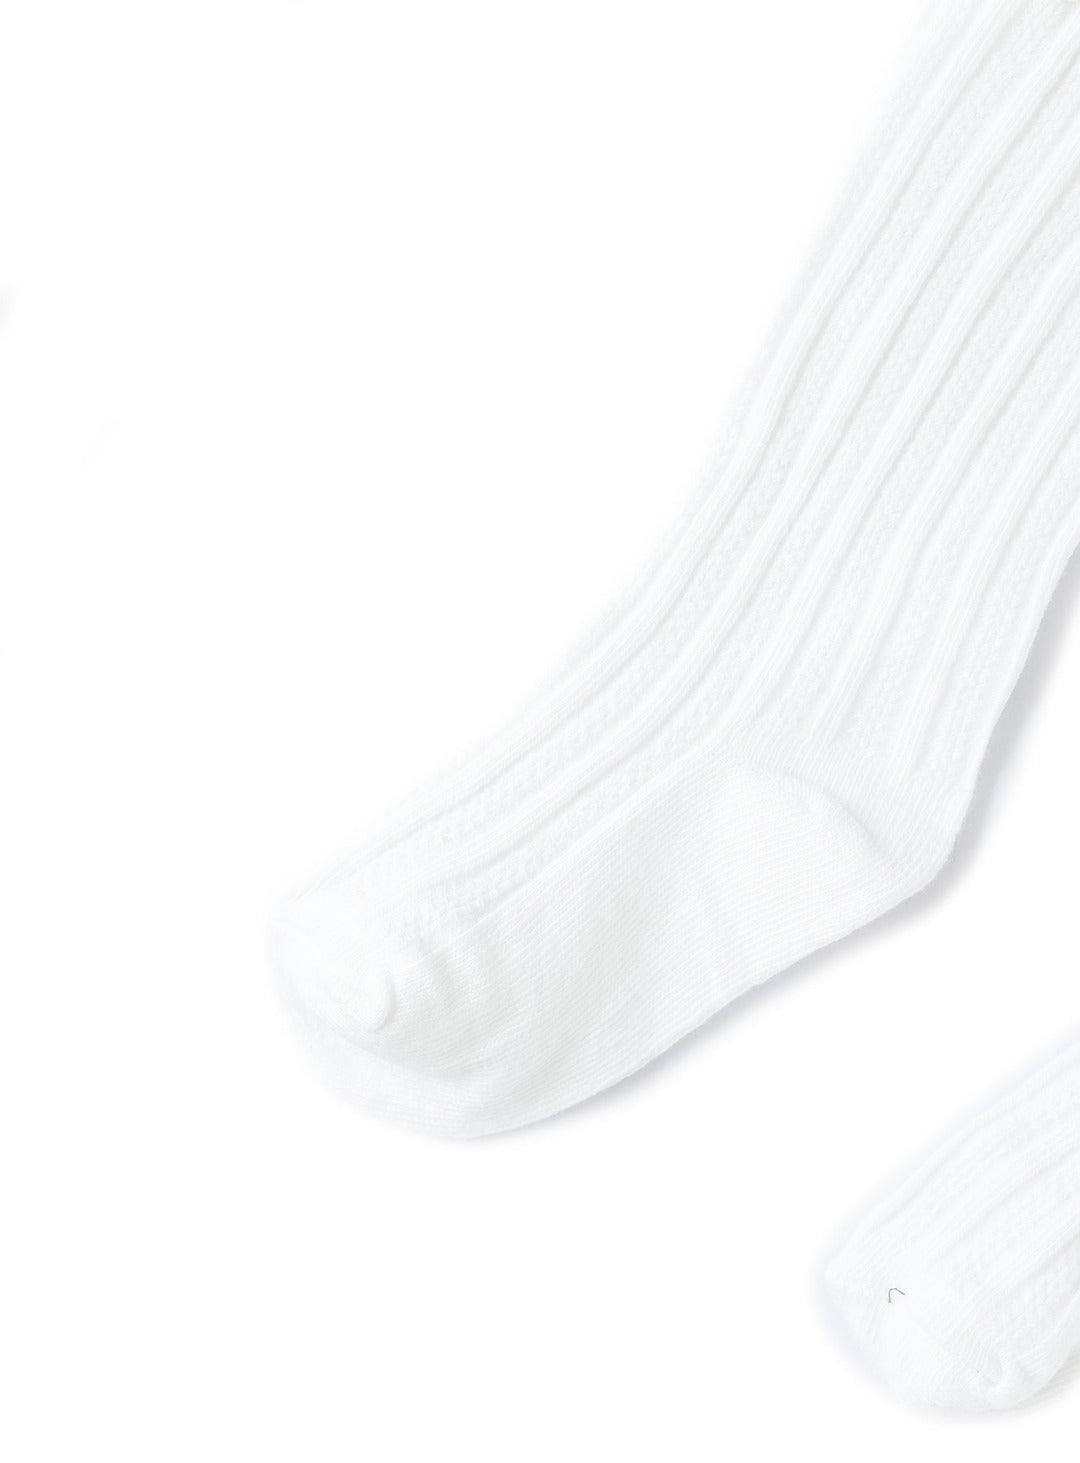 milk white socks with lace